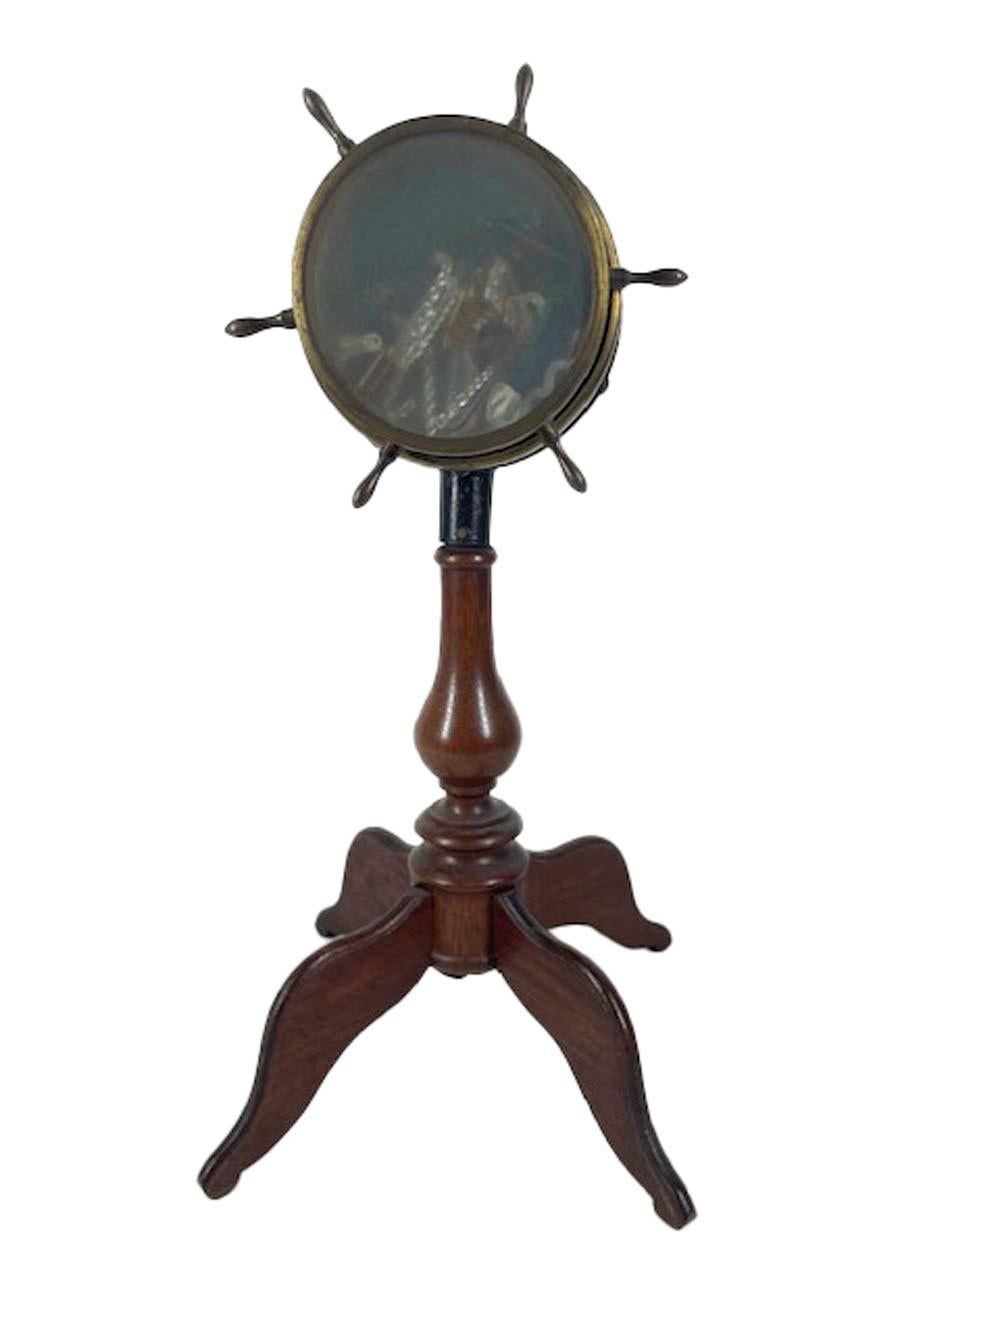 American 19th Century Parlor Kaleidoscope by C.G. Bush & Co. of Providence, RI For Sale